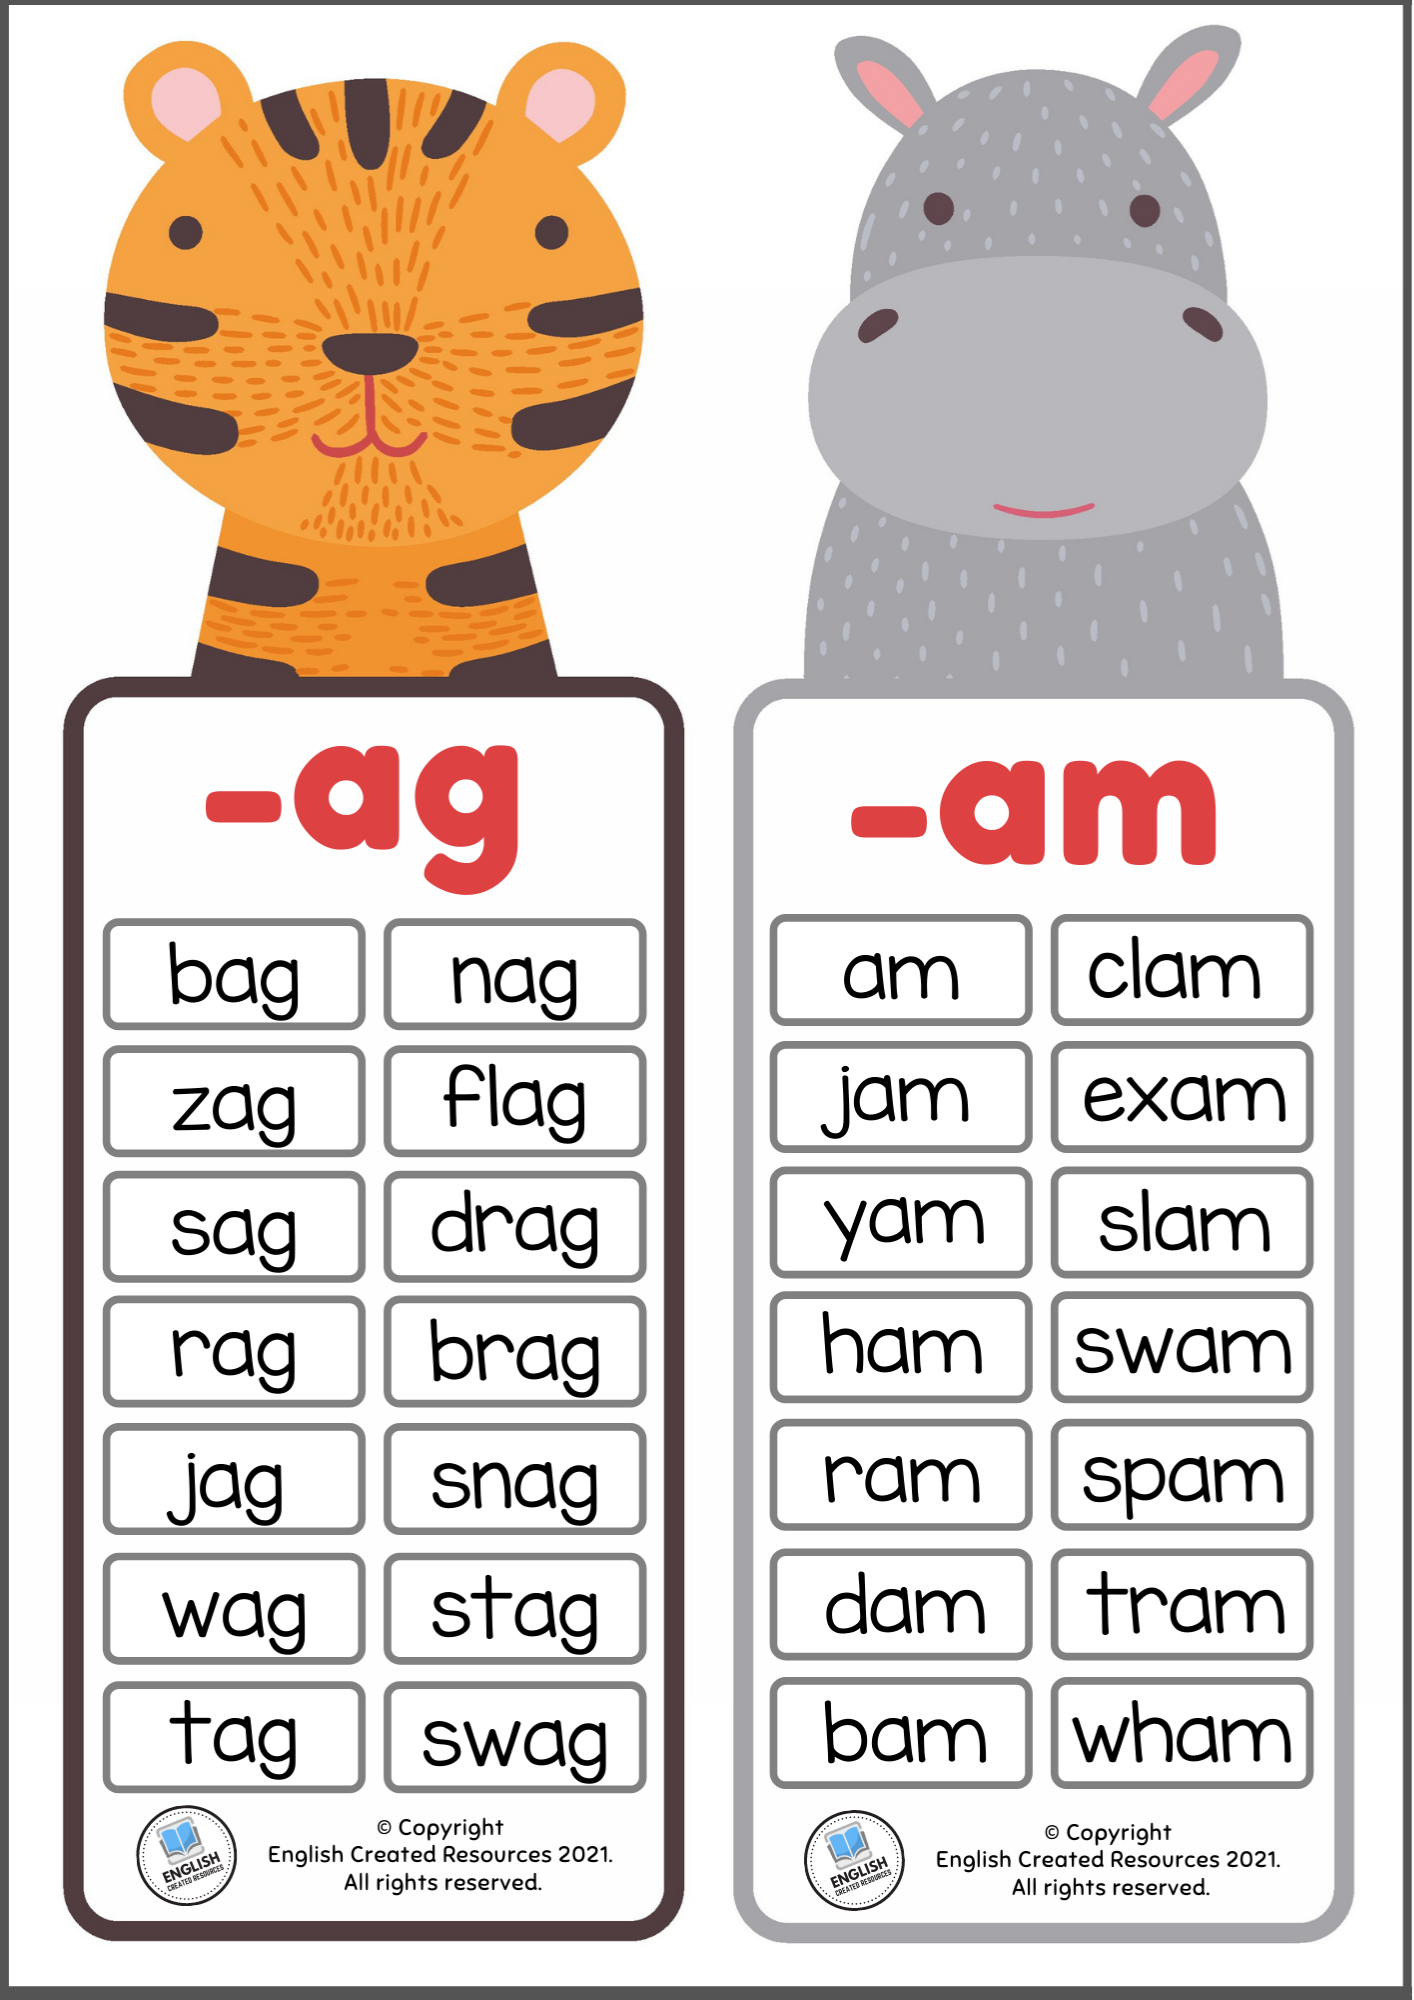 word-family-charts-english-created-resources